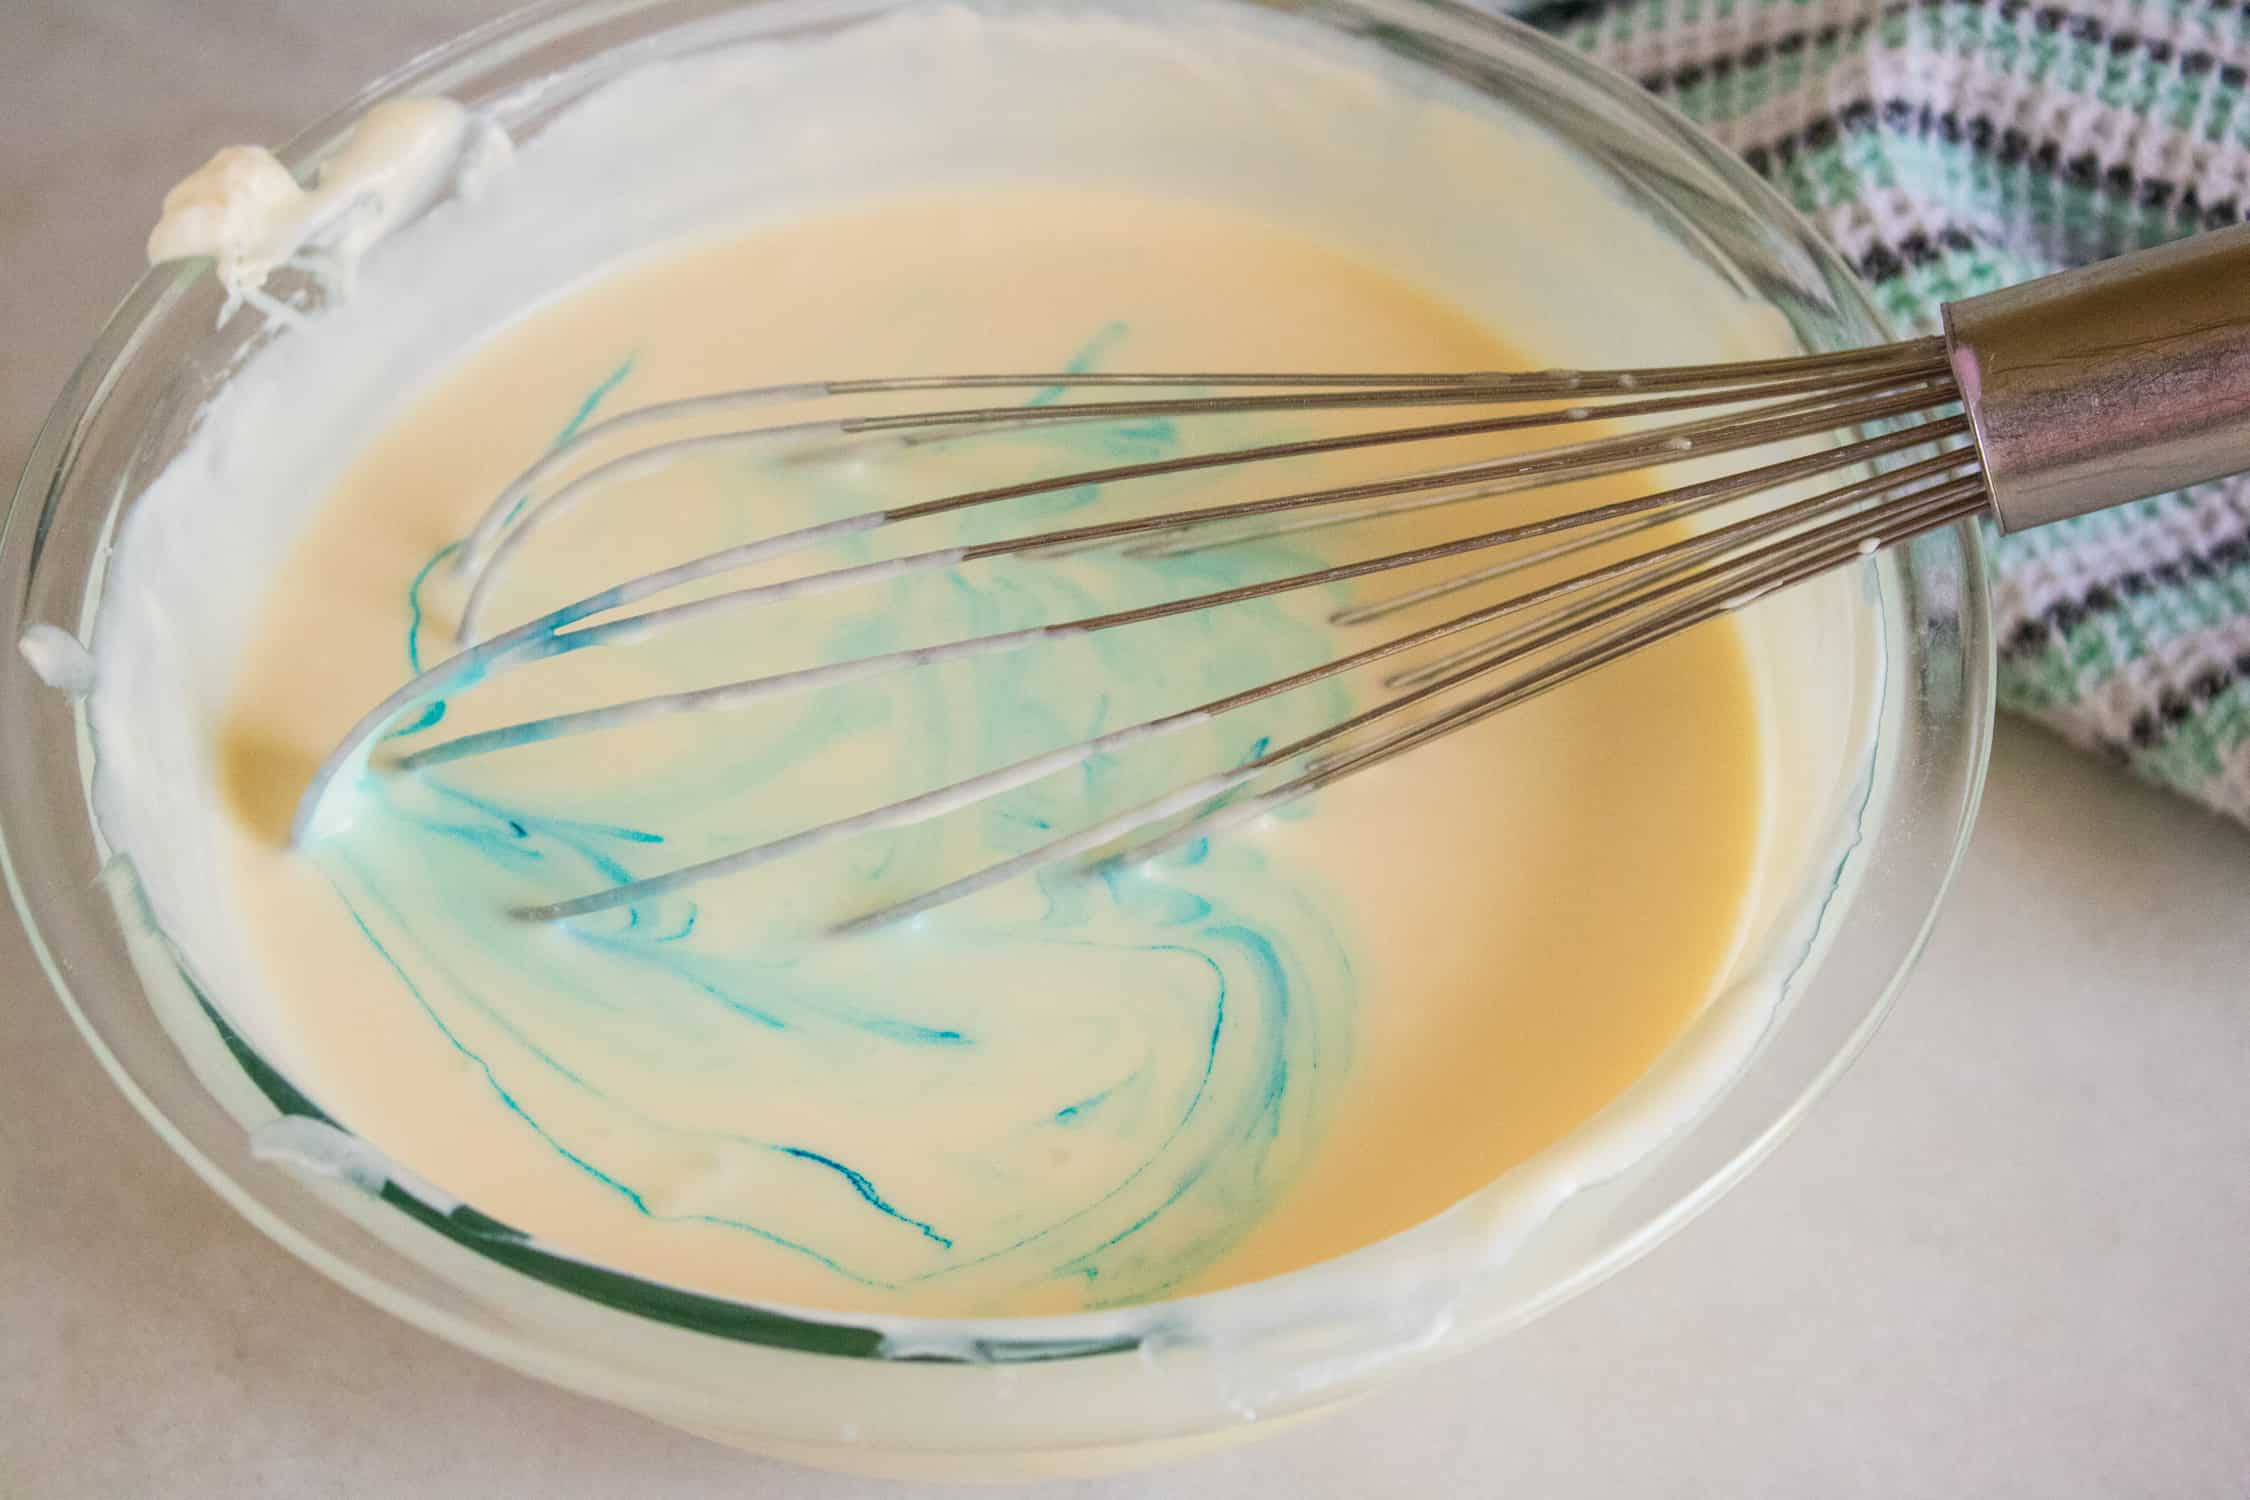 Ice cream mixture in bowl with blue food coloring being whisked in.